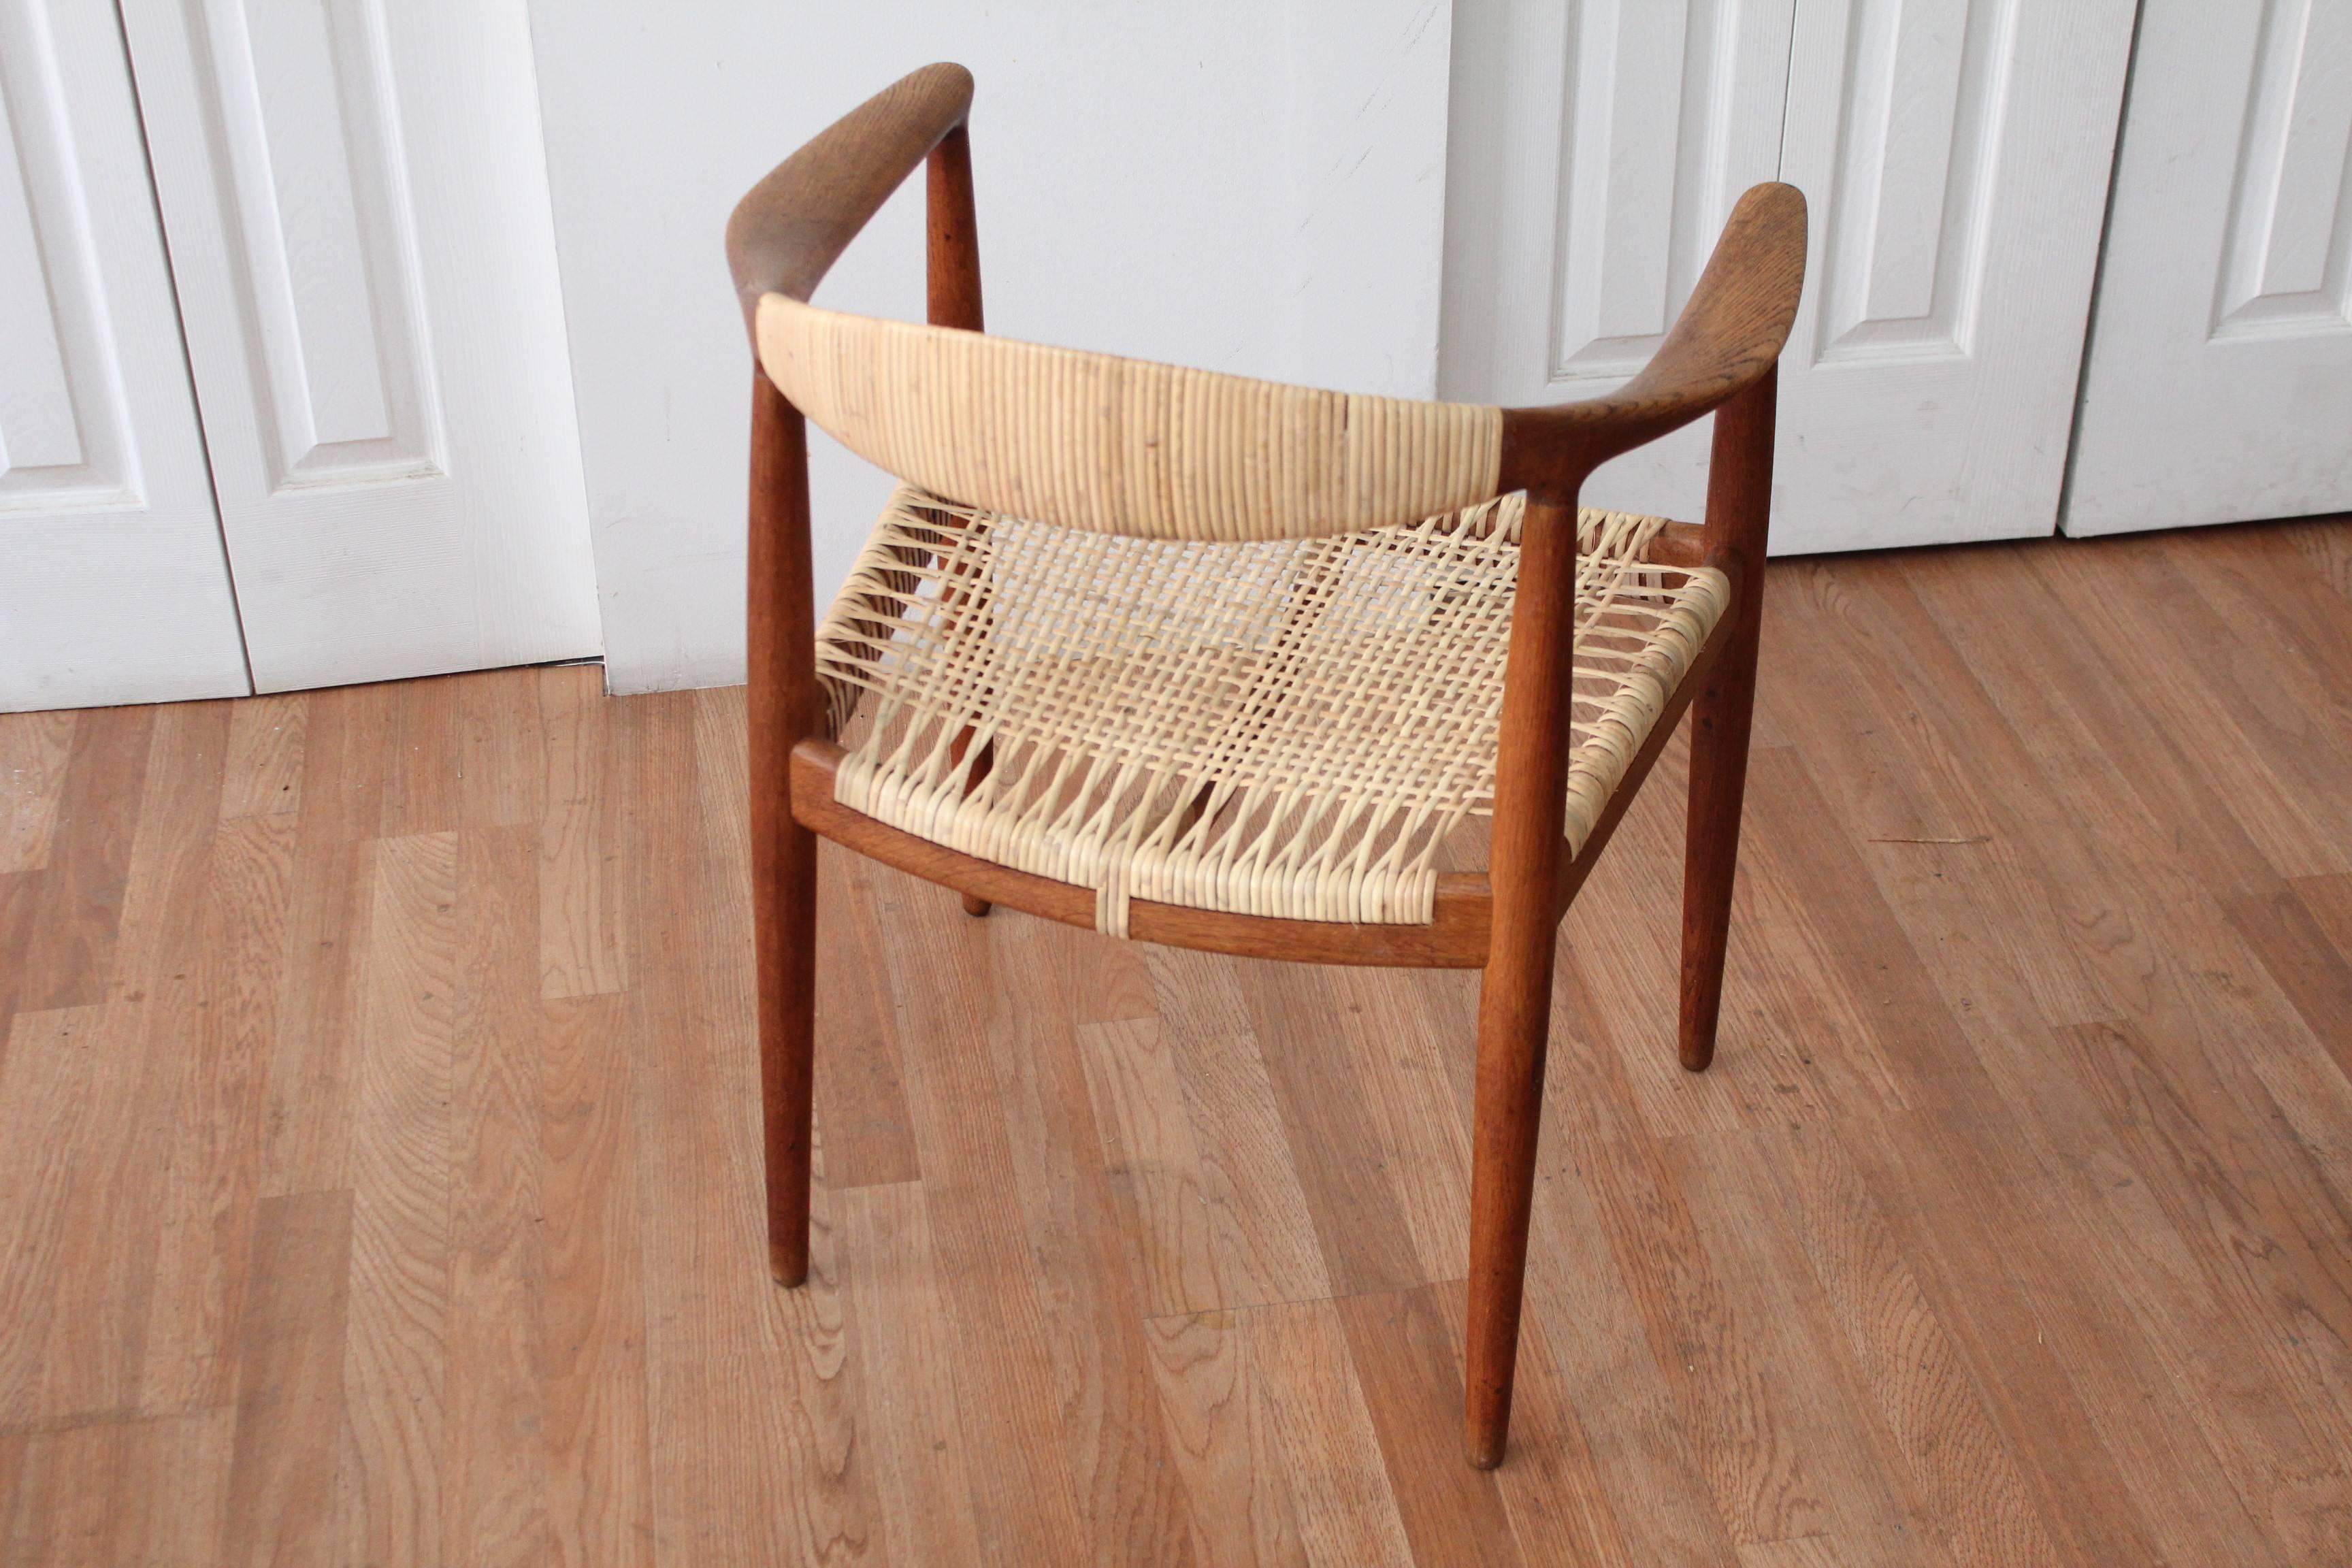 This is the Hans Wegner model #JH-501 known as 